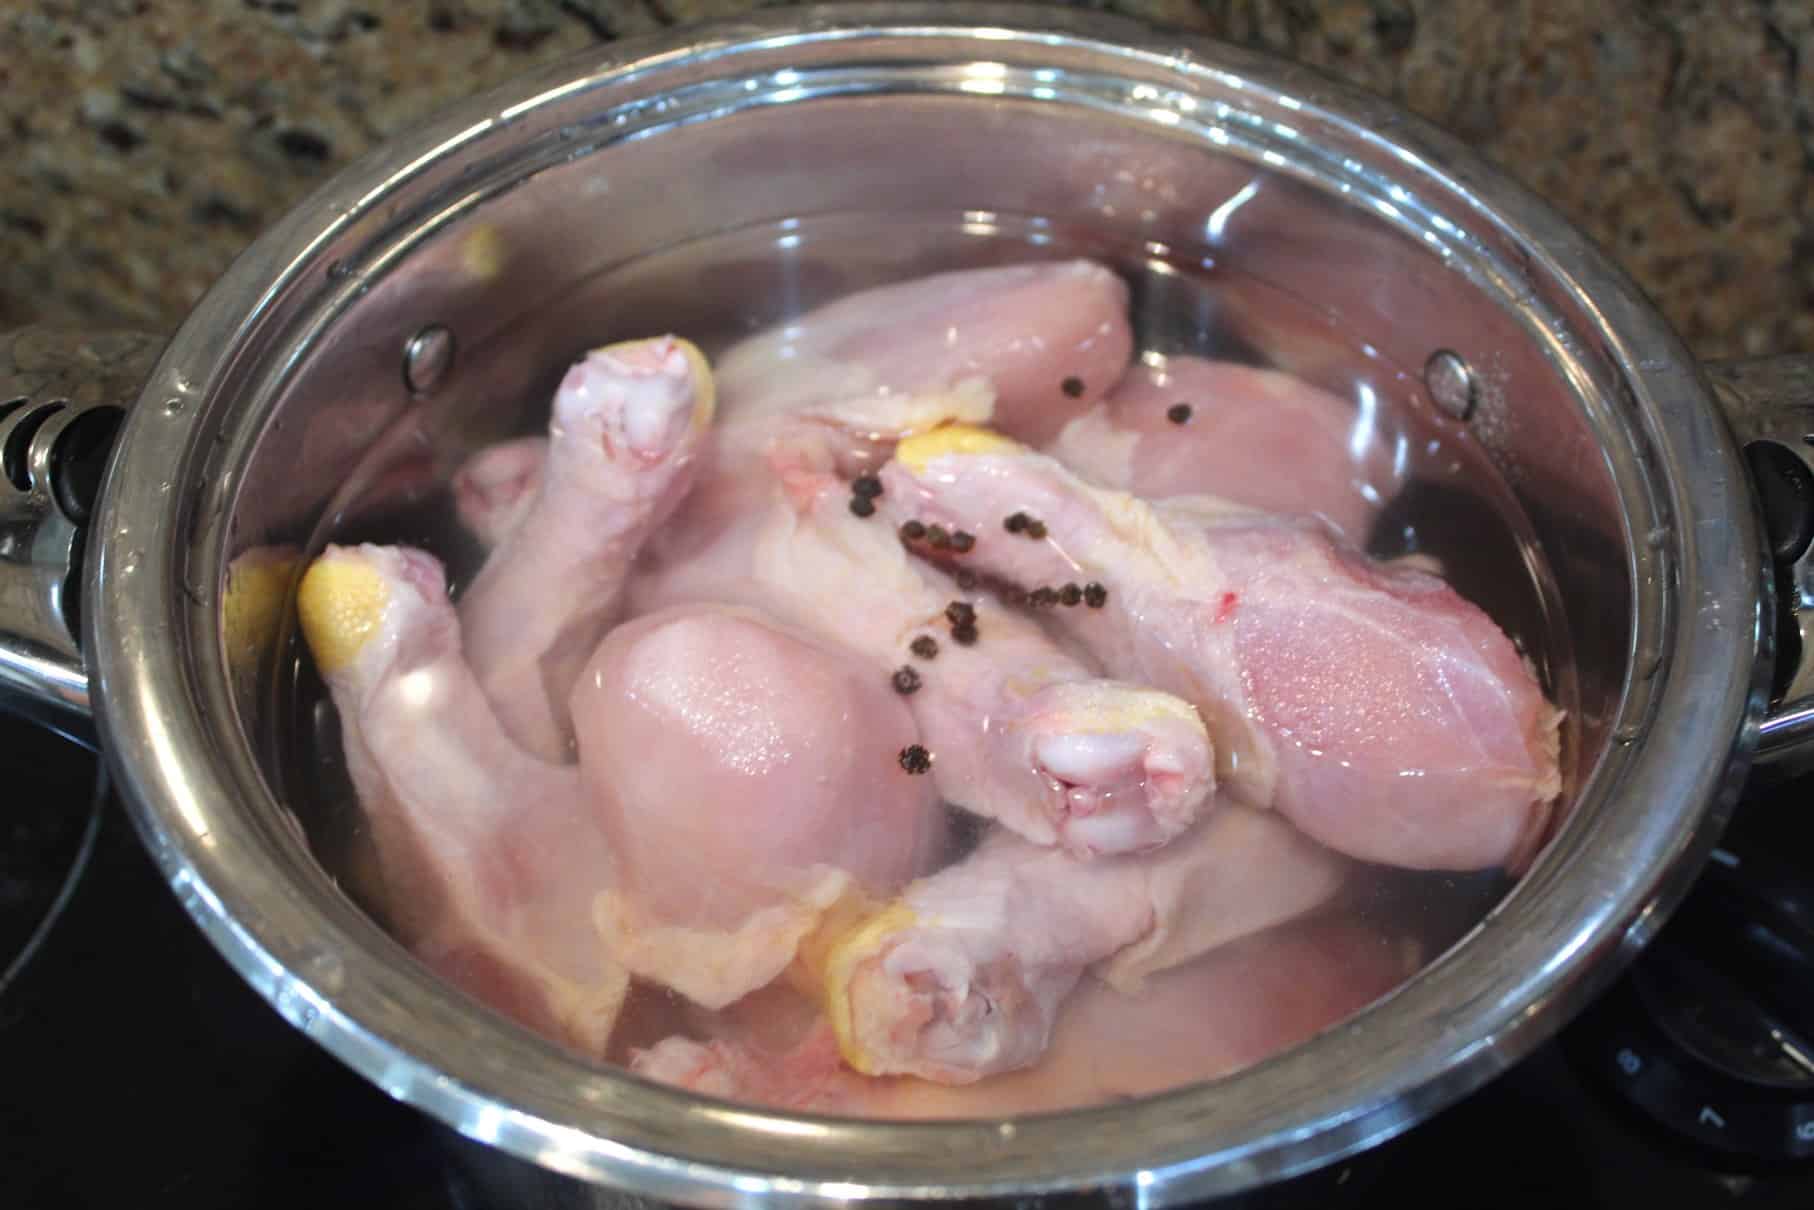 A pot with raw drumsticks shown with some peppercorn and water, ready to cook.